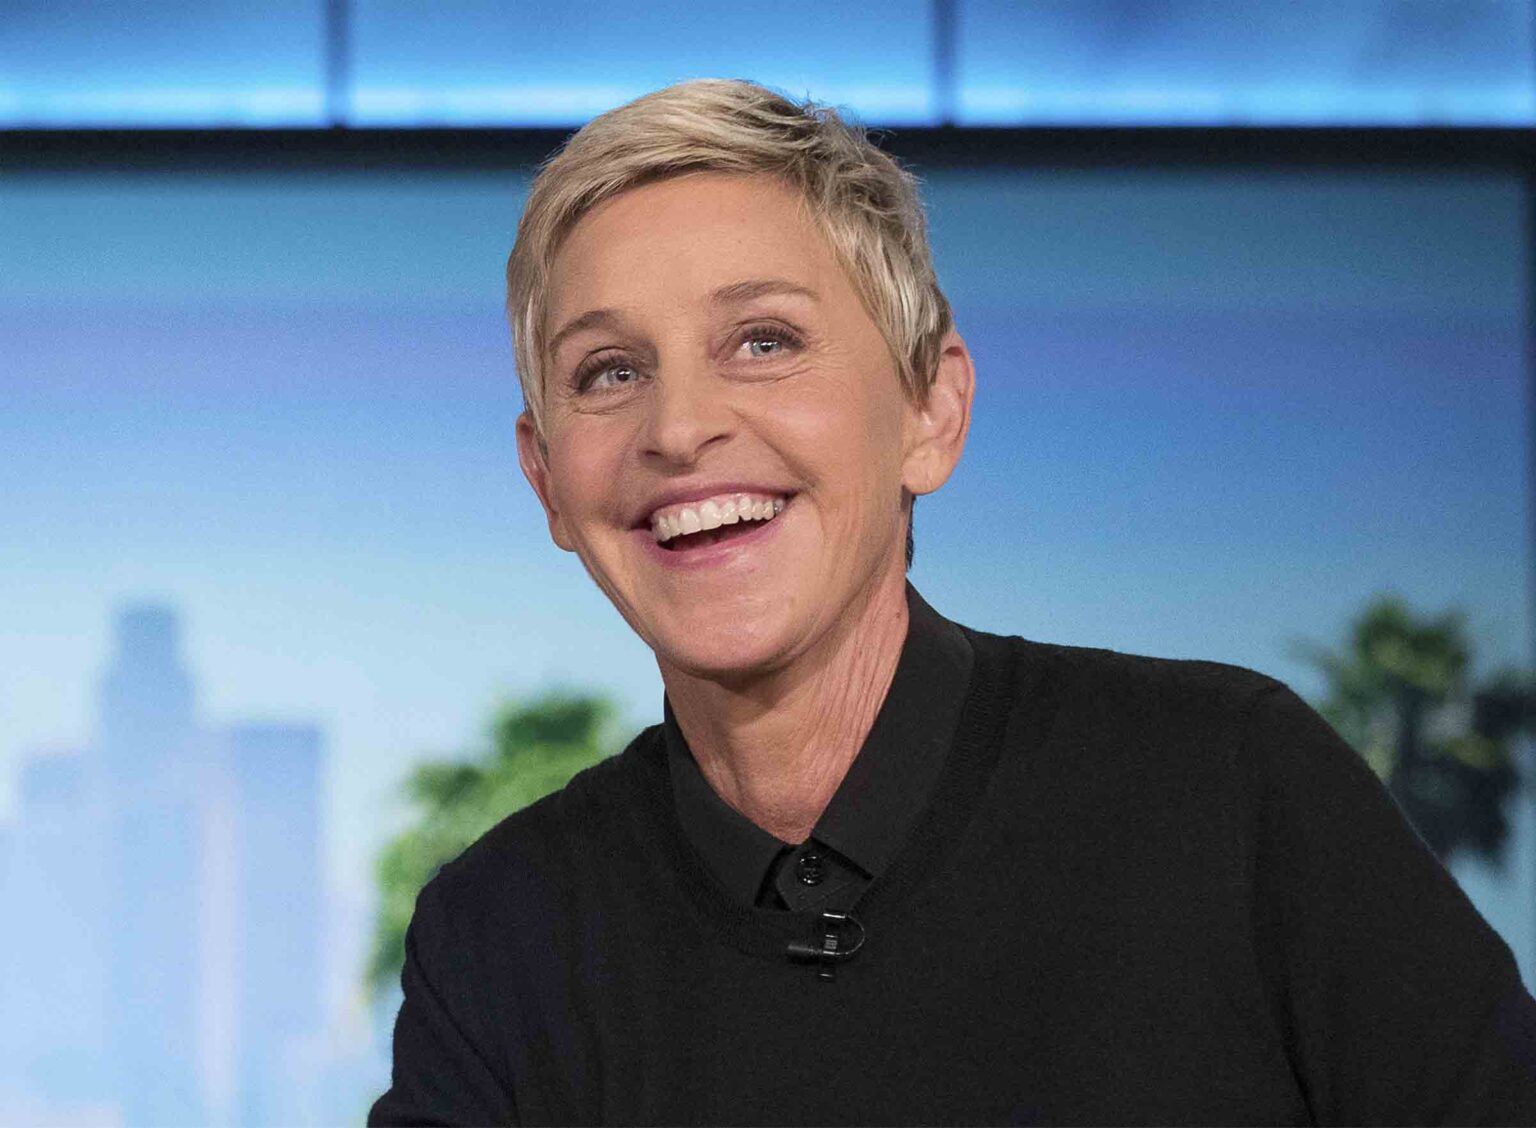 Ellen DeGeneres’s Instagram page is full of some bizarre content – that’s where The Ellen DeGeneres Show posts clips of interviews, promos, and weird internet videos.